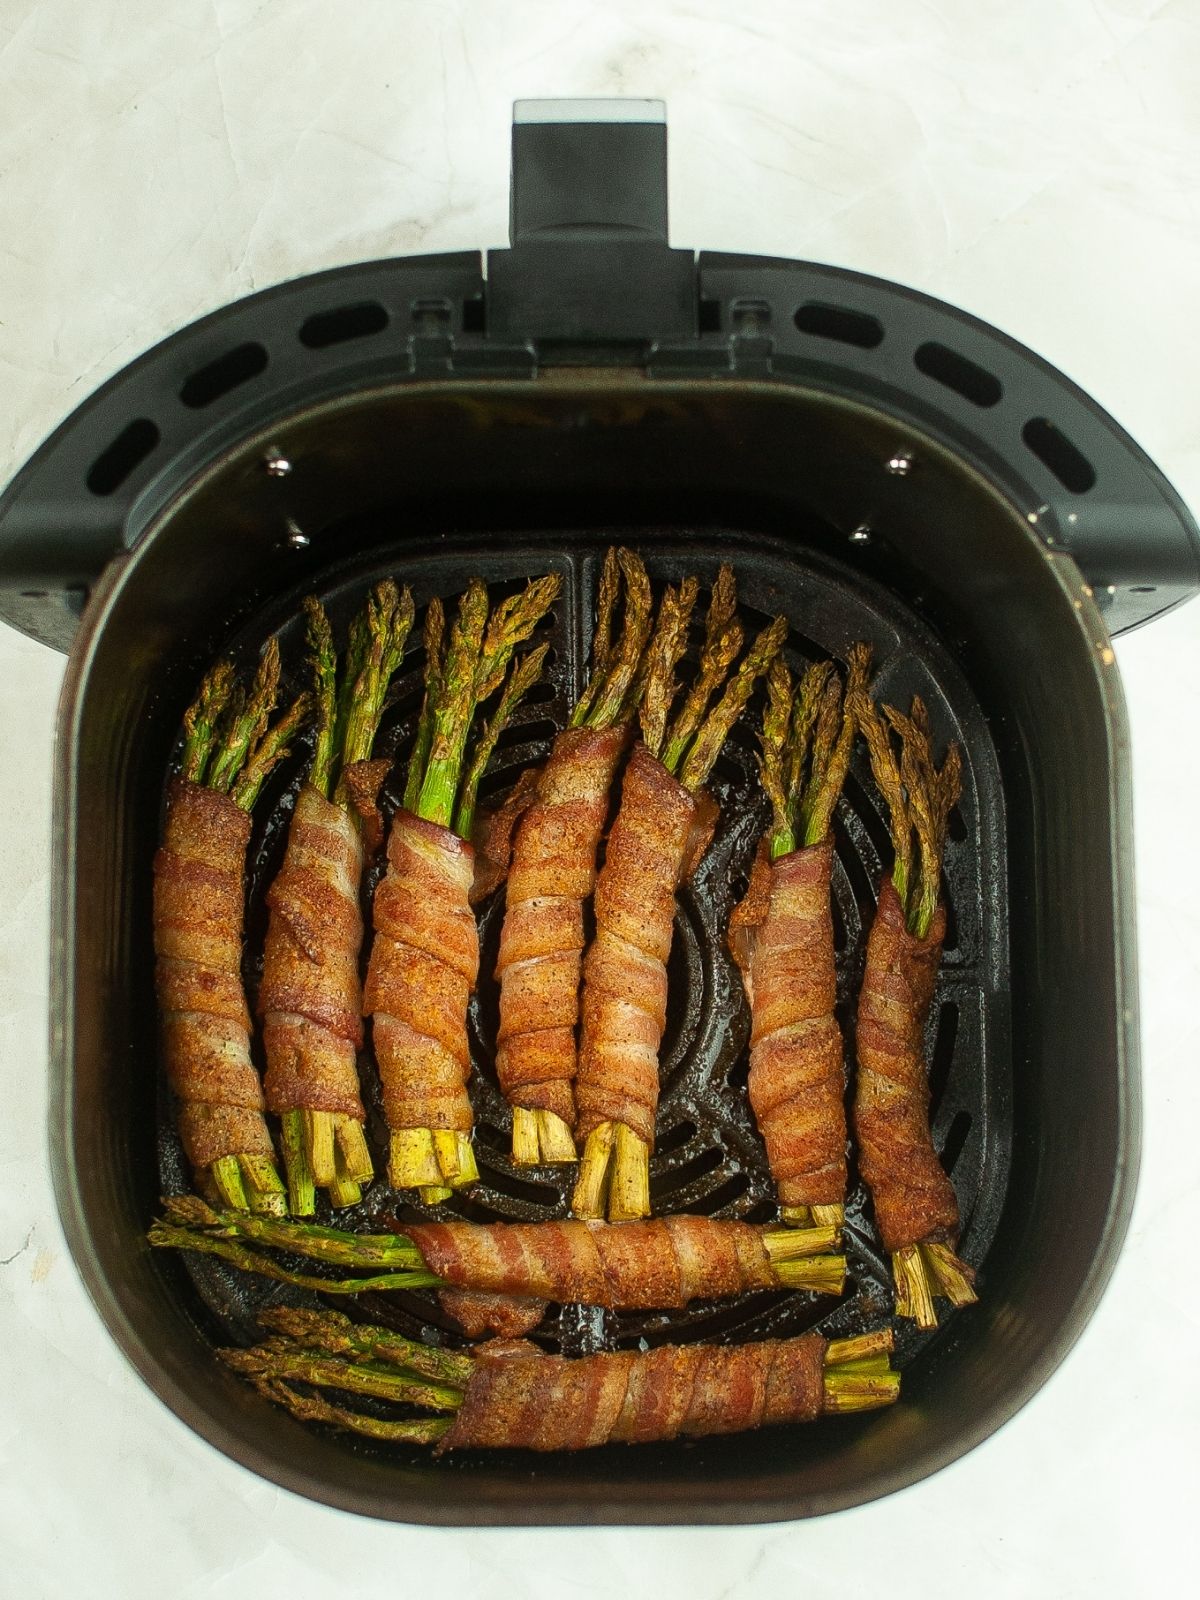 cooked asparagus with bacon in air fryer.